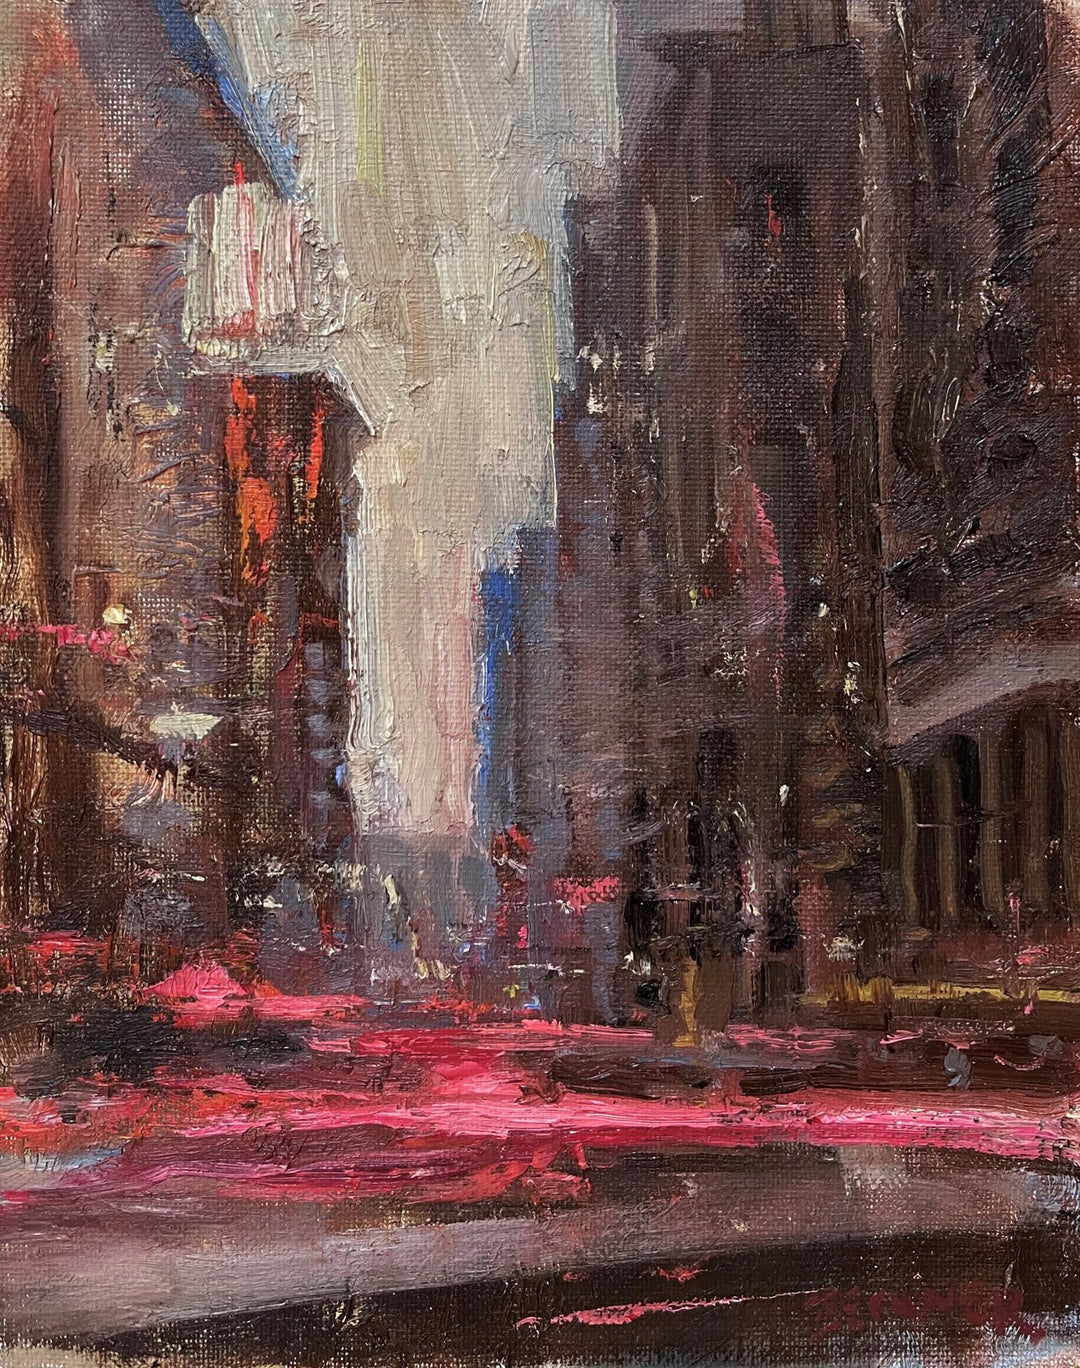 Jim Beckner's "Street Movement" painting, created by Jim Beckner himself, captures the dynamic Street Movement of a city street, illuminated by vibrant red lights.